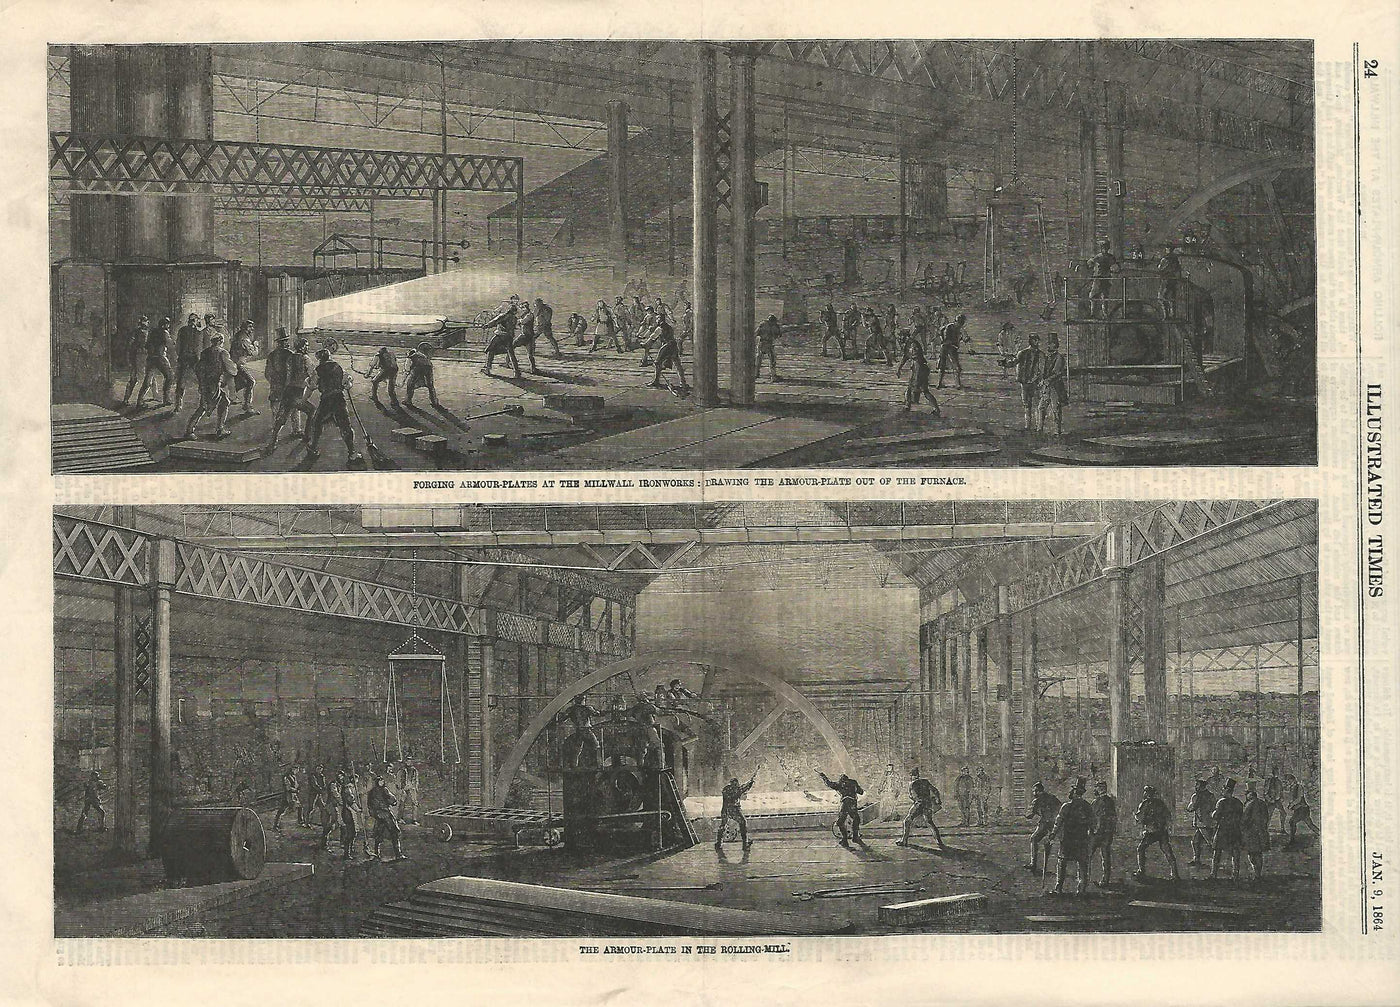 Millwall Ironworks armour-plating manufacture antique print